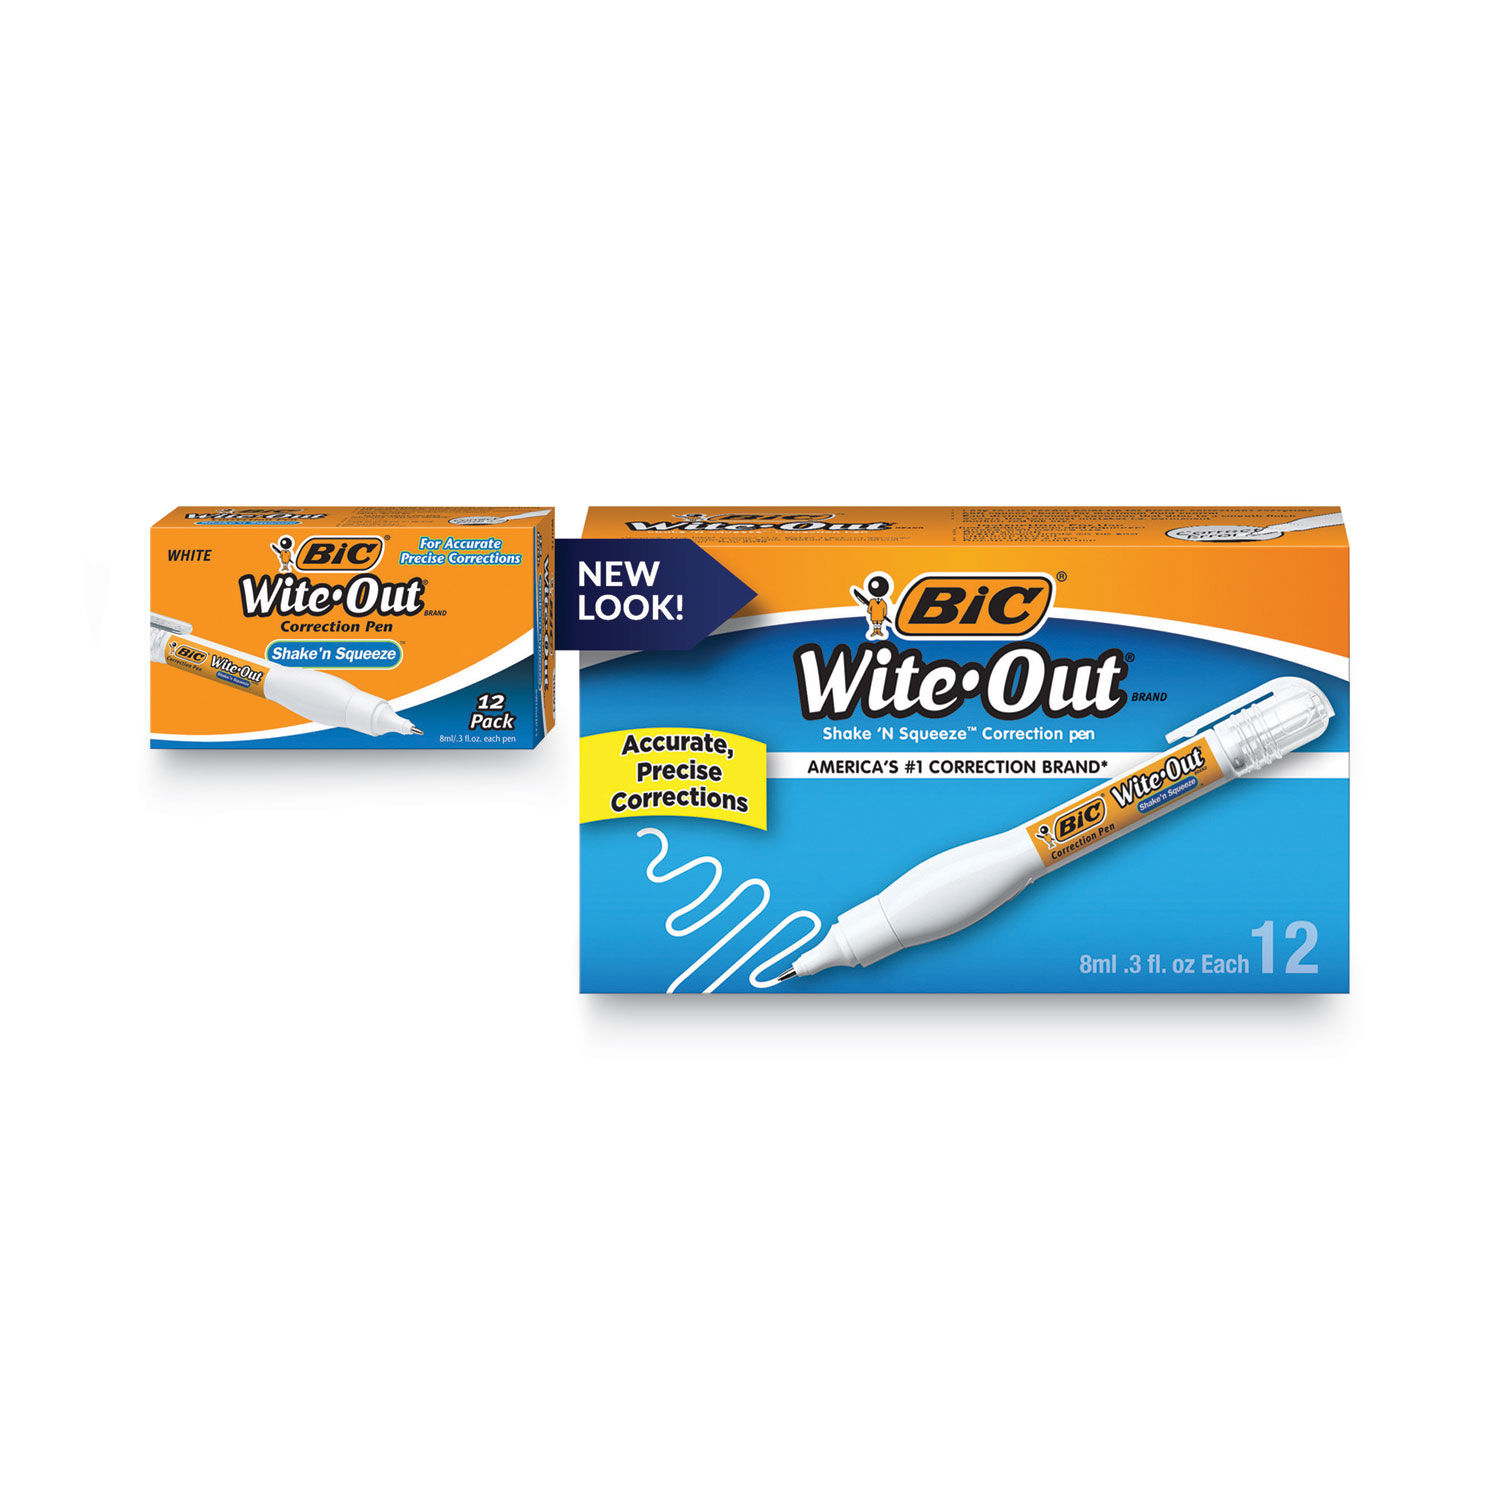 BIC Wite-Out Brand Shake 'n Squeeze Correction Pen, White, 1-Count